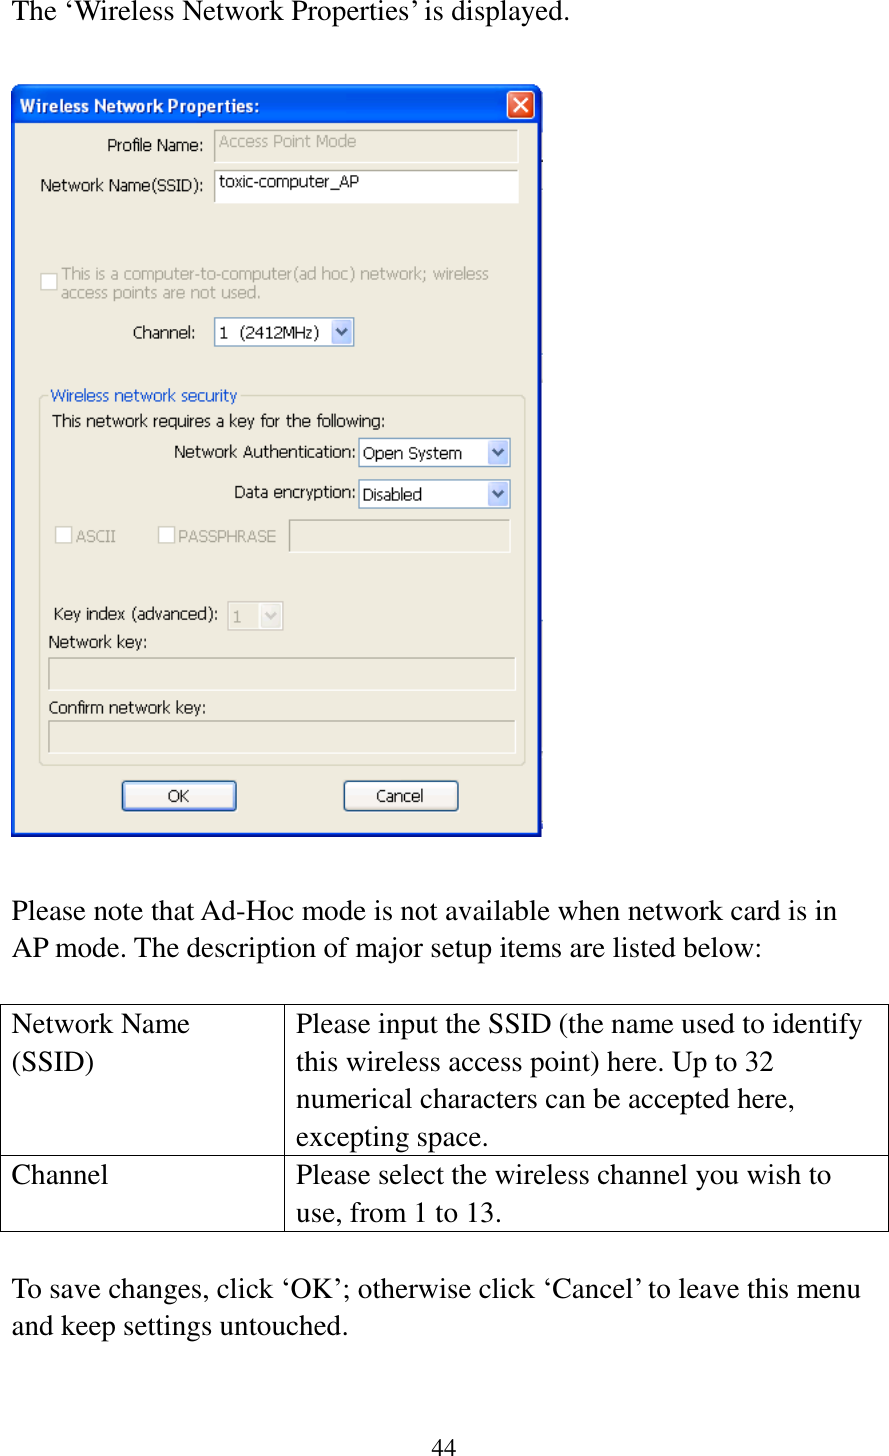 44  The ‘Wireless Network Properties’ is displayed.    Please note that Ad-Hoc mode is not available when network card is in AP mode. The description of major setup items are listed below:  Network Name (SSID) Please input the SSID (the name used to identify this wireless access point) here. Up to 32 numerical characters can be accepted here, excepting space. Channel Please select the wireless channel you wish to use, from 1 to 13.  To save changes, click ‘OK’; otherwise click ‘Cancel’ to leave this menu and keep settings untouched.   